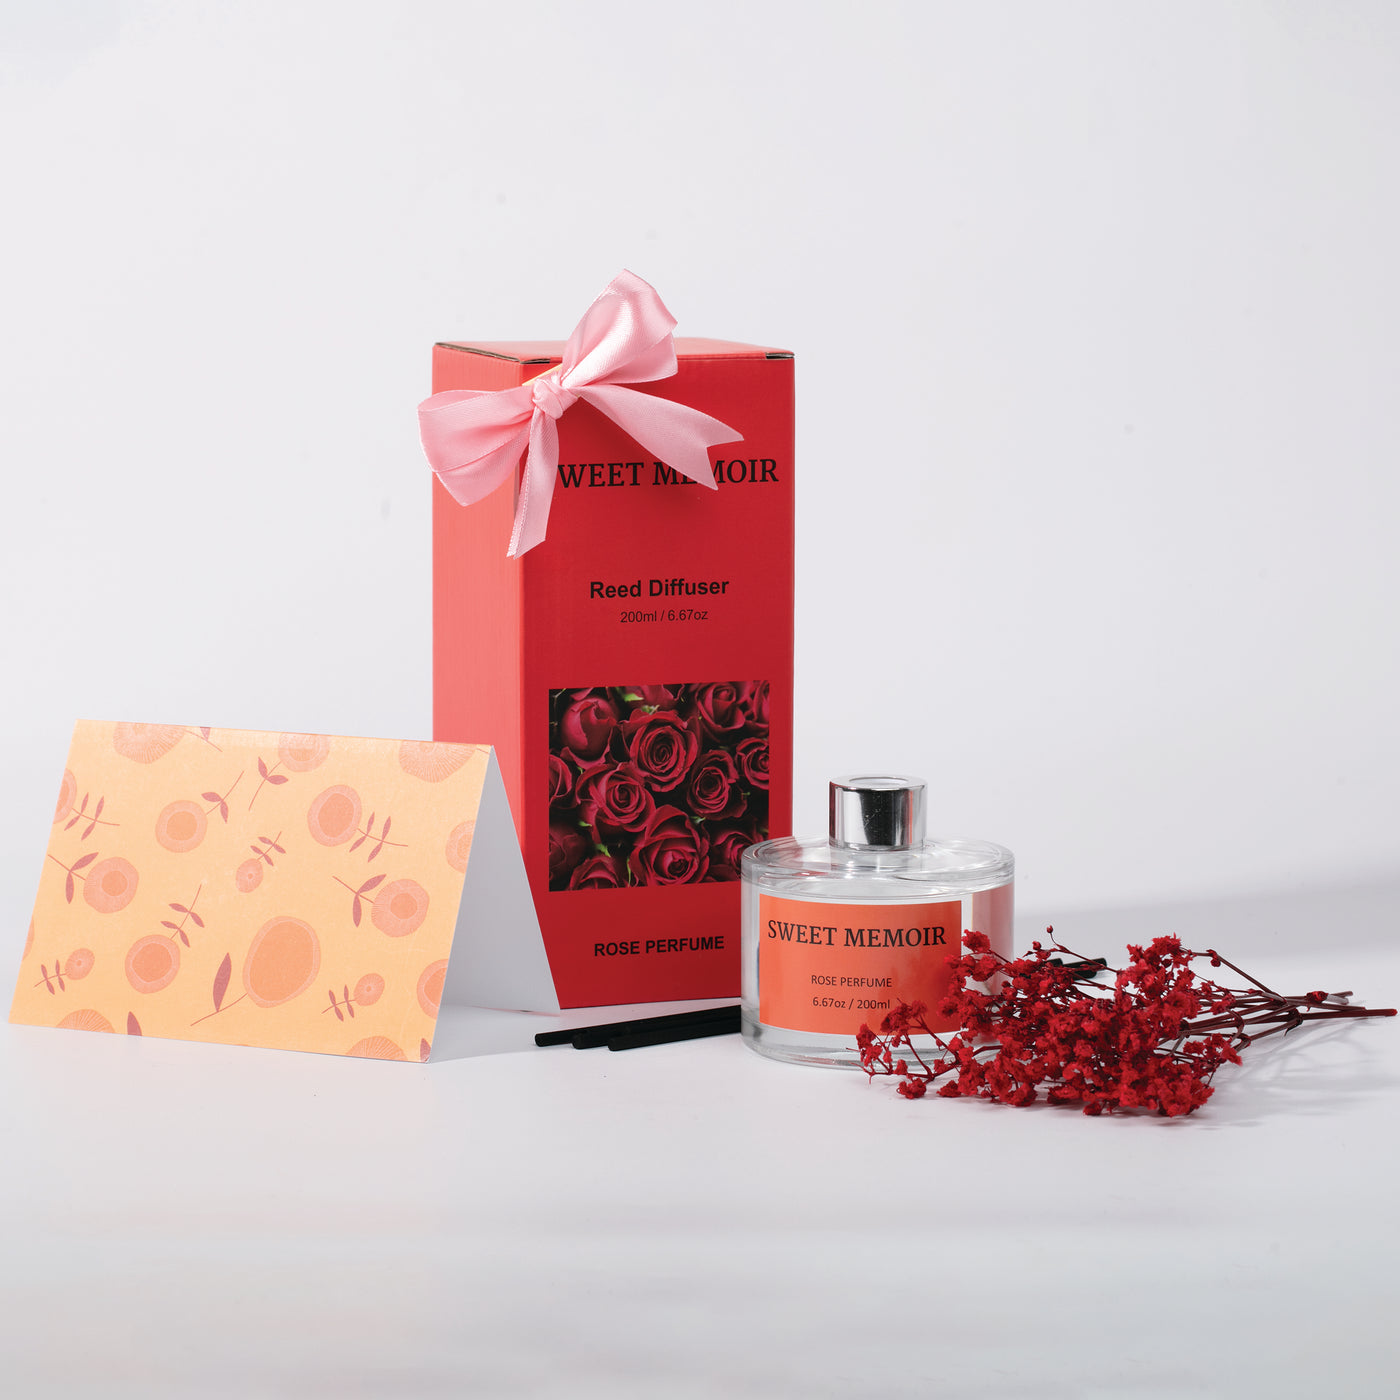 Sweet Memoir's elegantly boxed reed diffuser gift sets, showcasing various scents for special occasions.